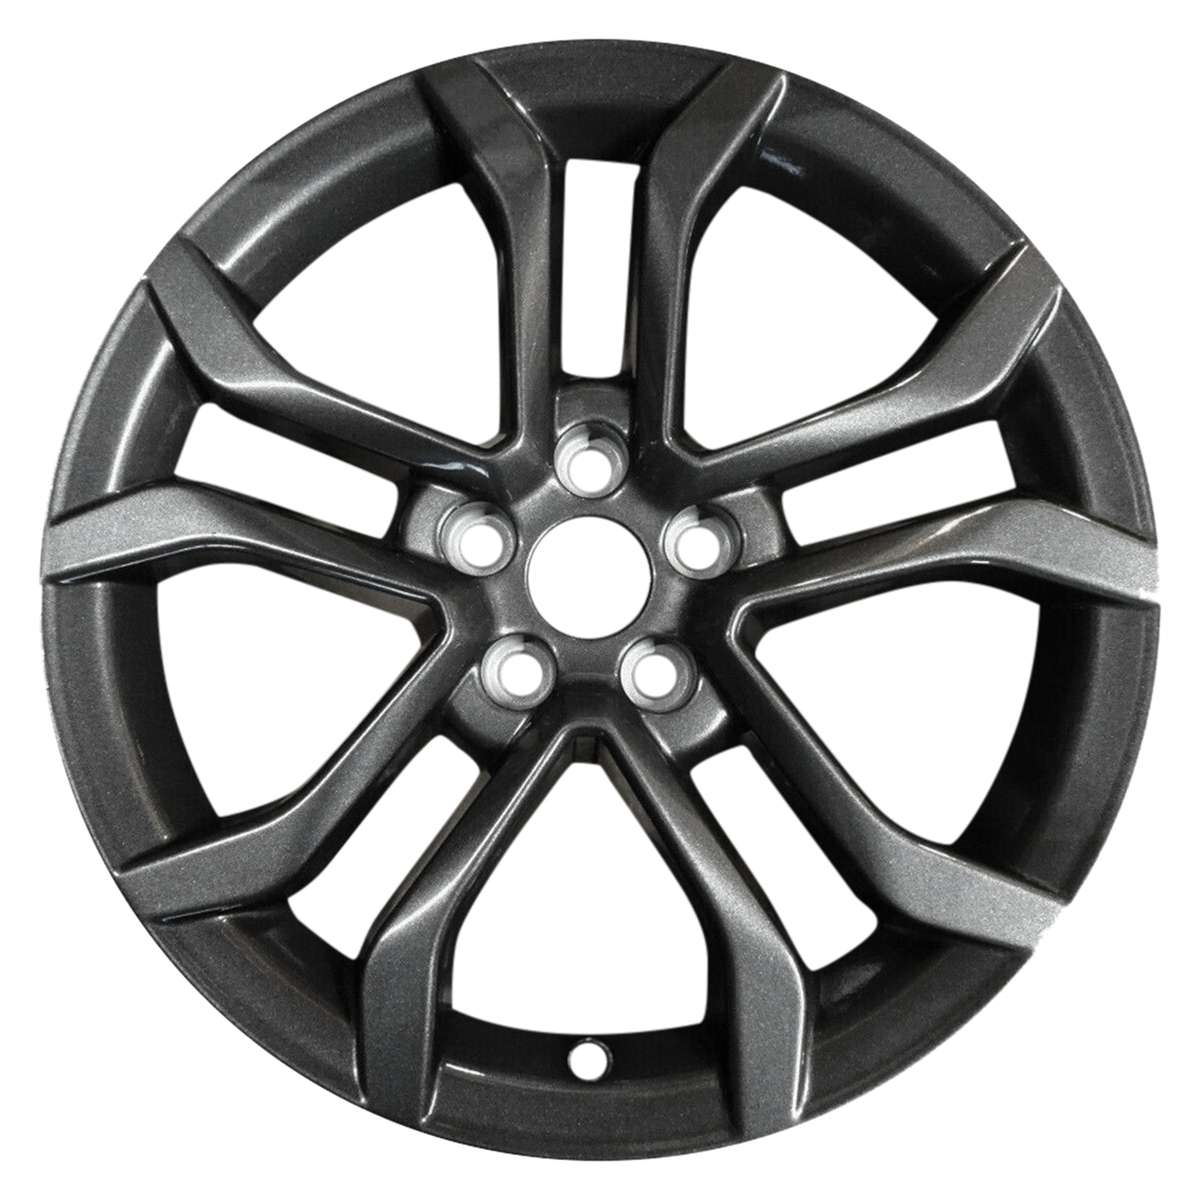 2020 Ford Fusion New 18" Replacement Wheel Rim RW10120C